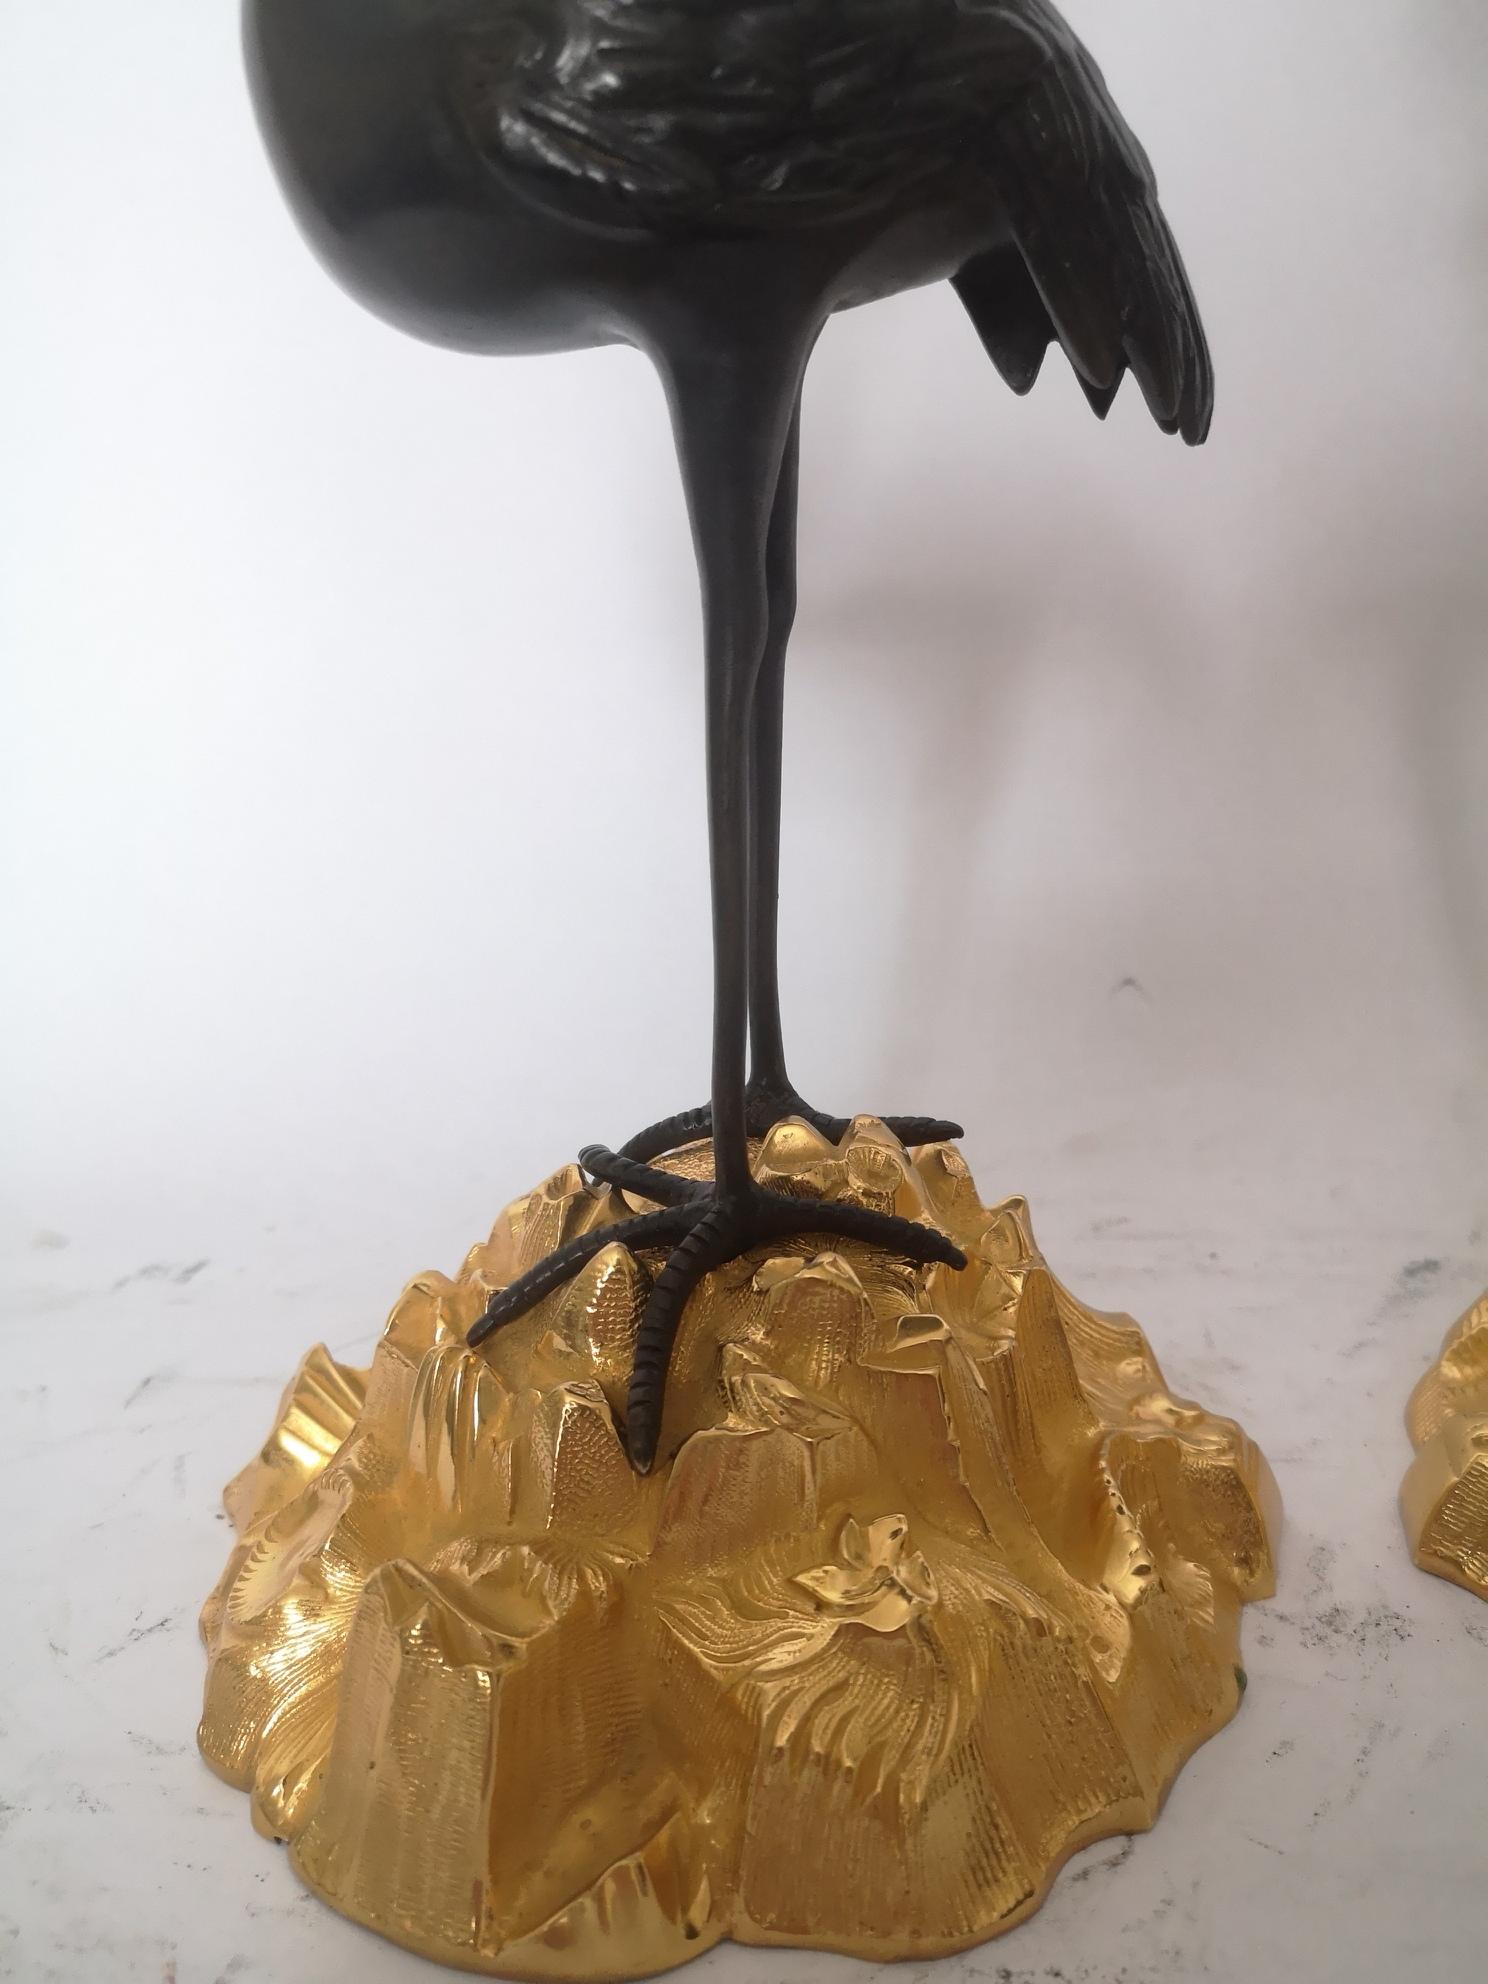 Pair of Early 19th Century English Bronze and Gilt Stork Candlesticks by Abbot For Sale 1